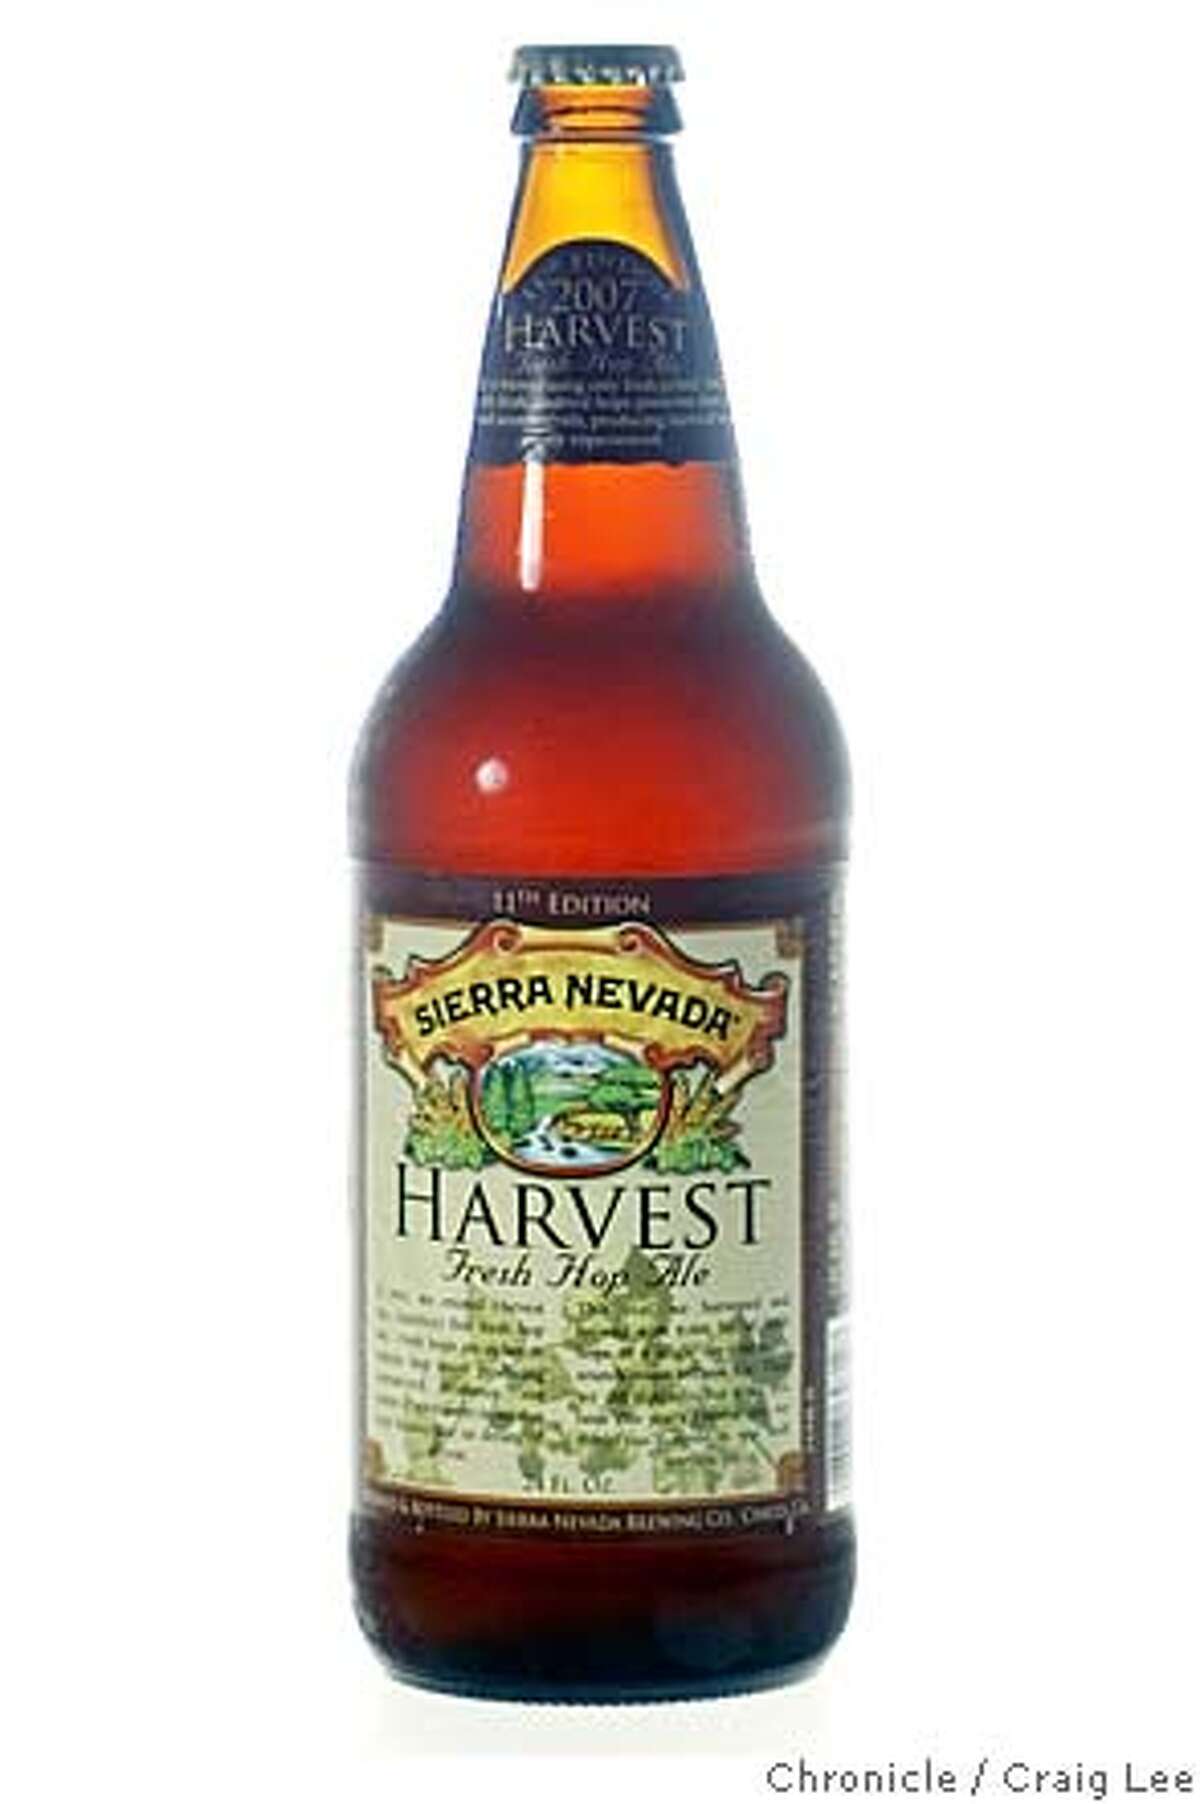 BEER26_001_cl.JPG Photo of a bottle of Sierra Nevada Harvest Fresh Hop Ale. on 10/23/07 in San Francisco. photo by Craig Lee / The Chronicle MANDATORY CREDIT FOR PHOTOG AND SF CHRONICLE/NO SALES-MAGS OUT